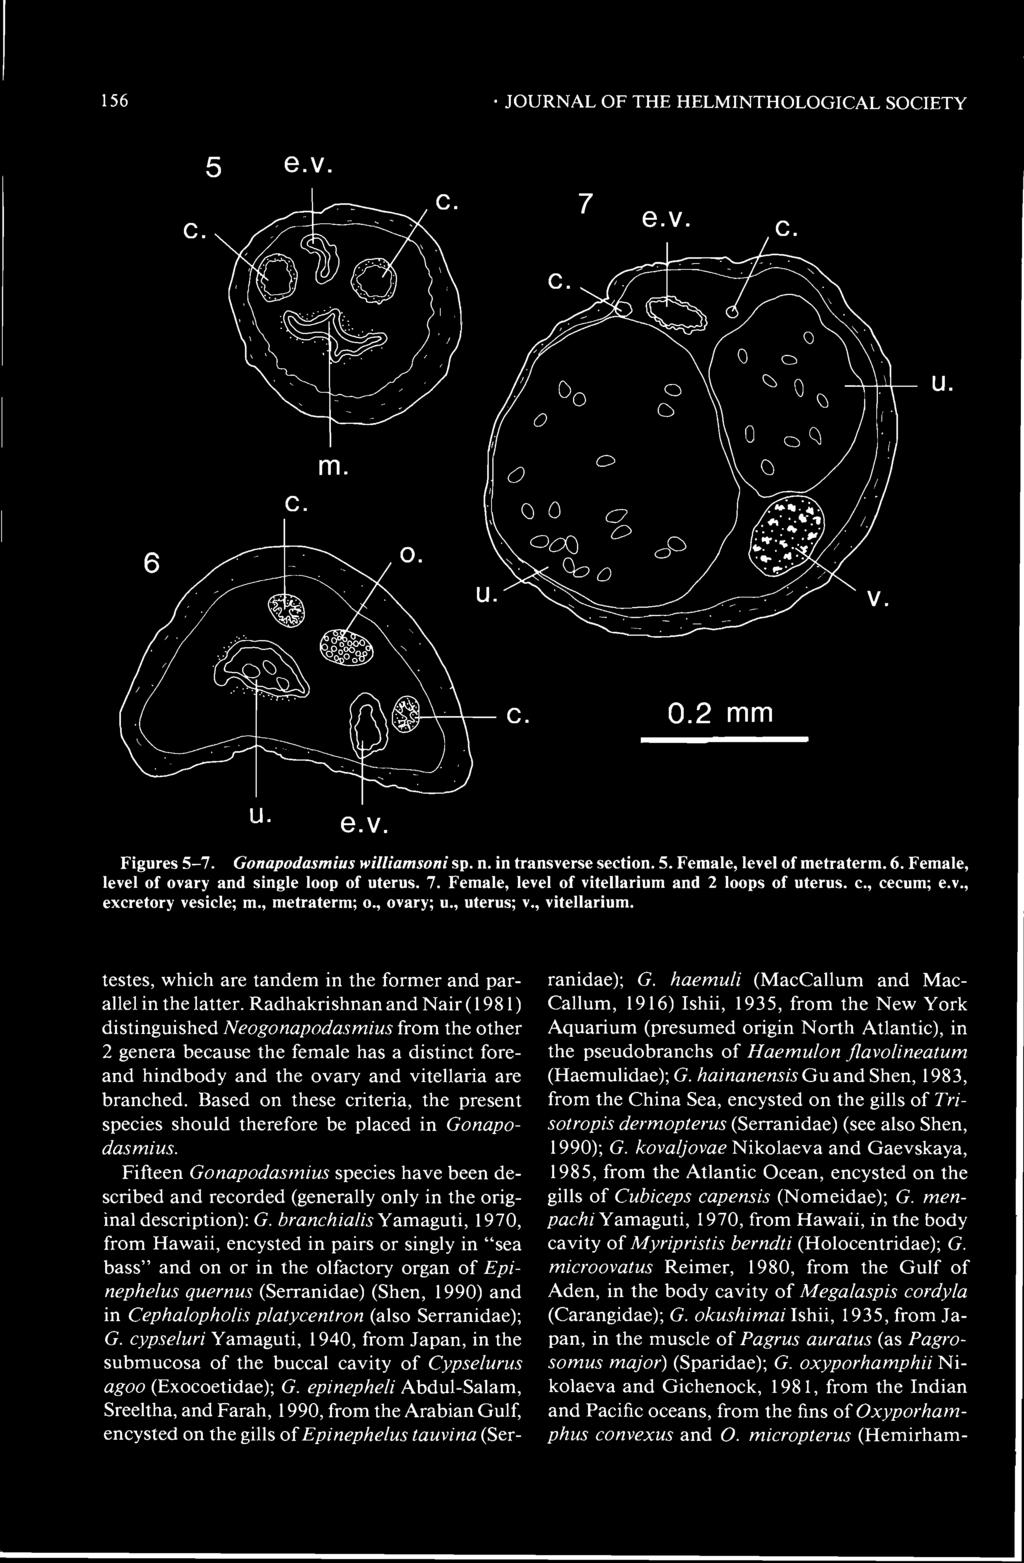 156 JOURNAL OF THE HELMINTHOLOGICAL SOCIETY 5 e.v. c. u. e.v. Figures 5-7. Gonapodasmius williamsoni sp. n. in transverse section. 5. Female, level of metraterm. 6.